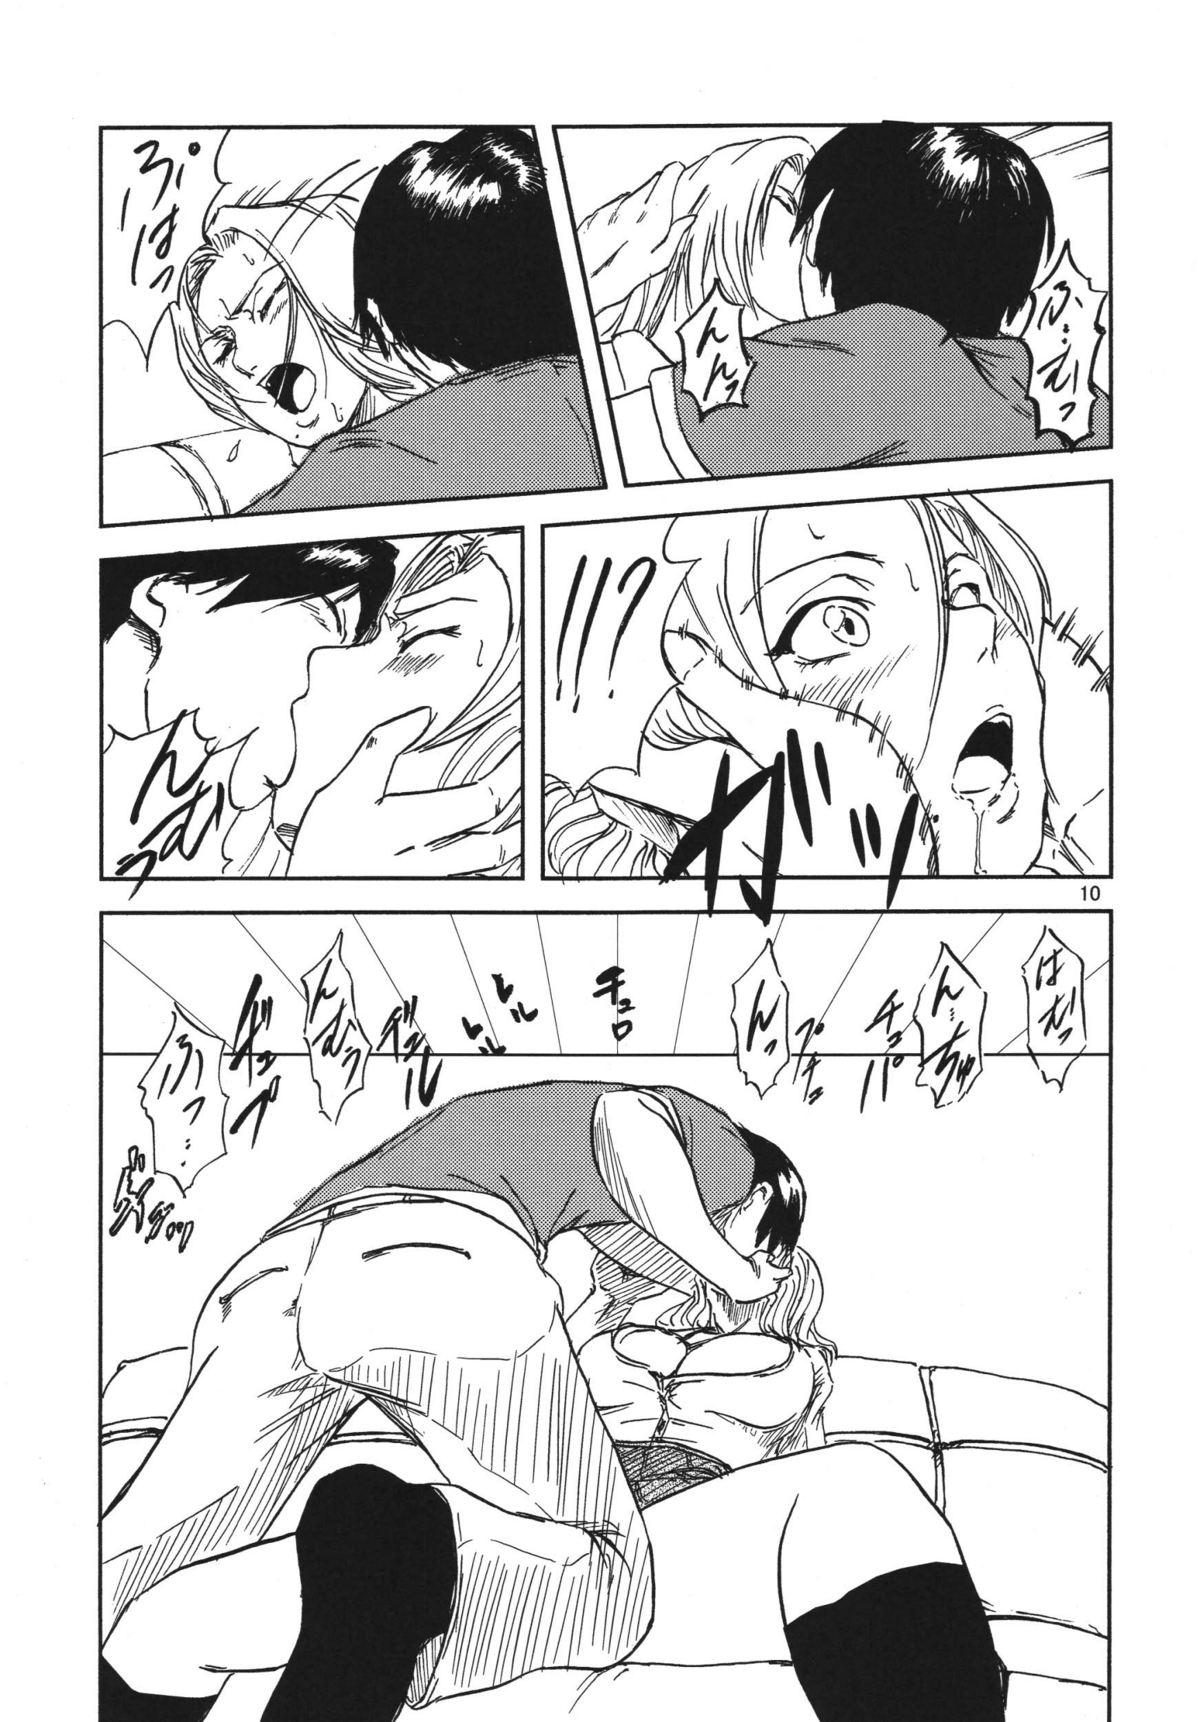 Swingers NO MERCY 3 - Bleach Facial - Page 10